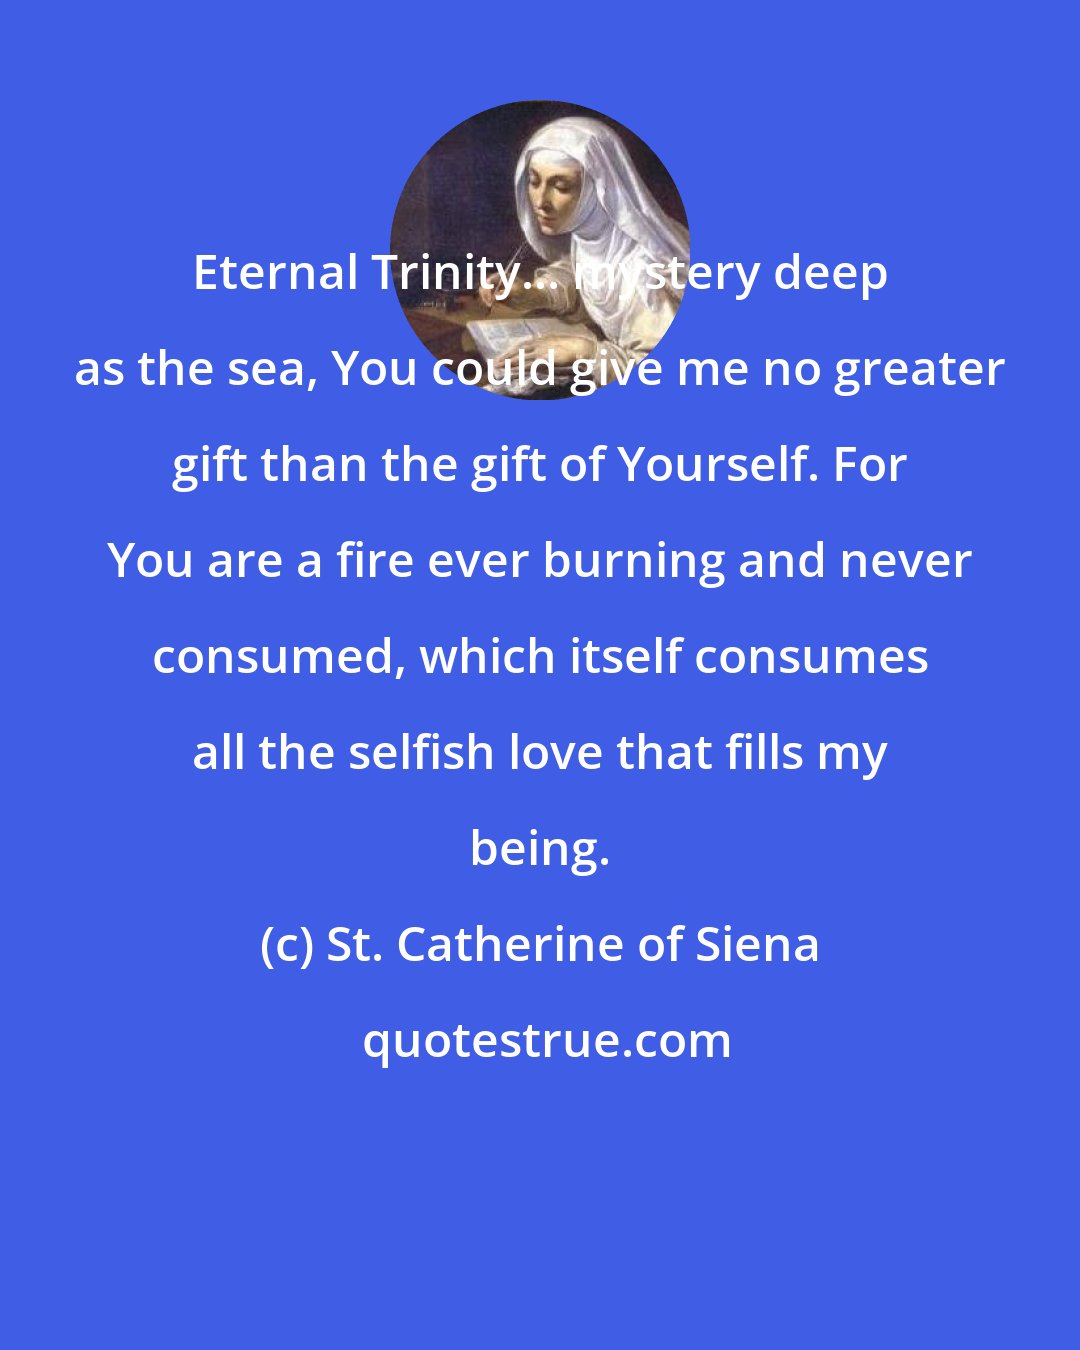 St. Catherine of Siena: Eternal Trinity... mystery deep as the sea, You could give me no greater gift than the gift of Yourself. For You are a fire ever burning and never consumed, which itself consumes all the selfish love that fills my being.